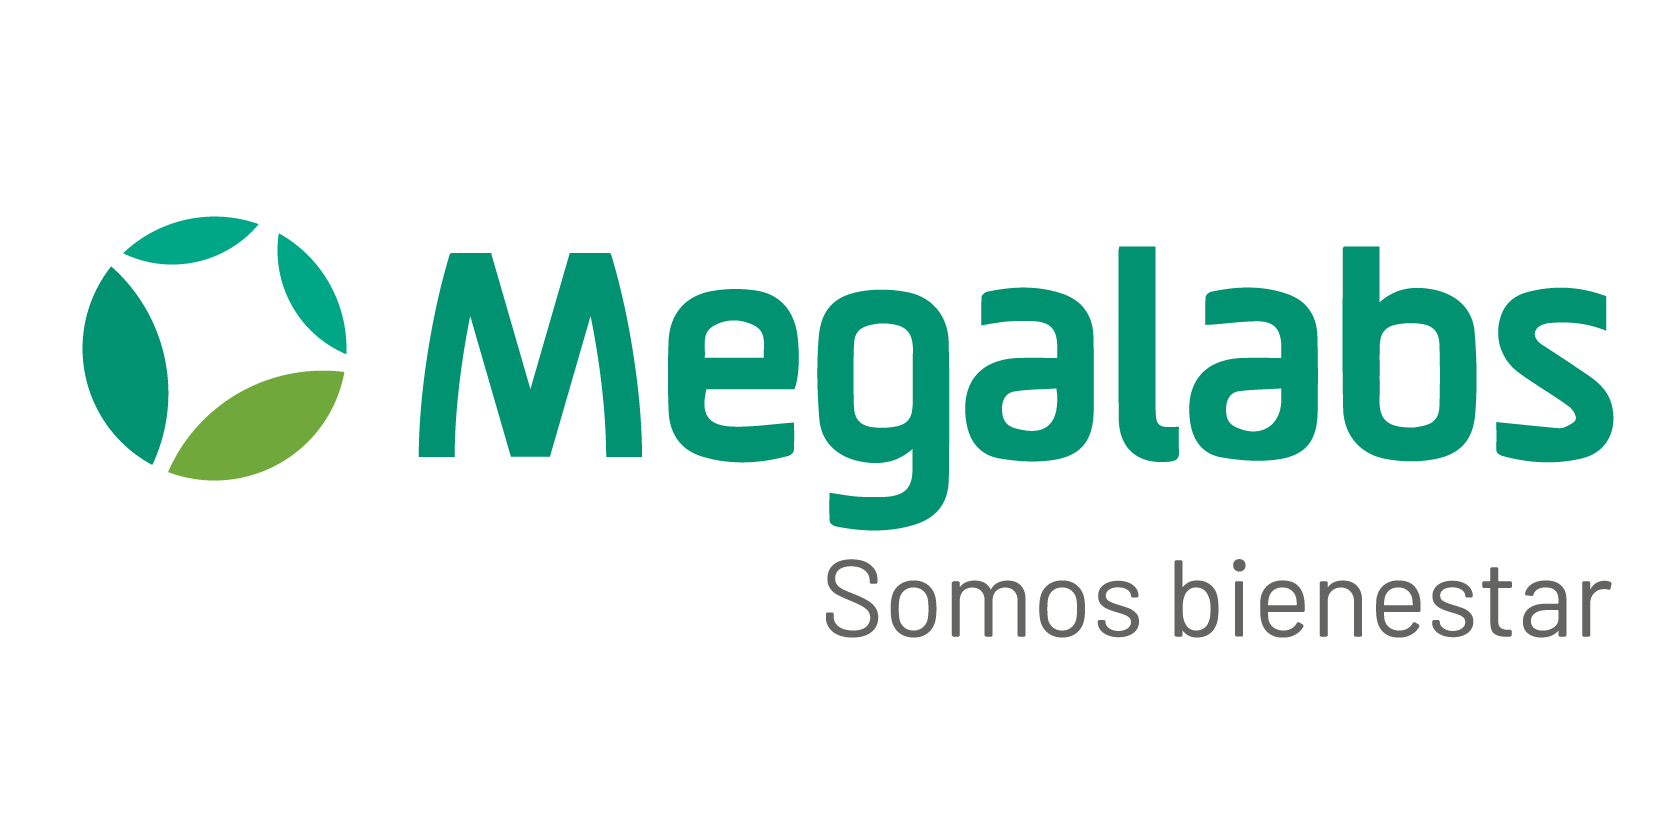 3.1 Megalabs